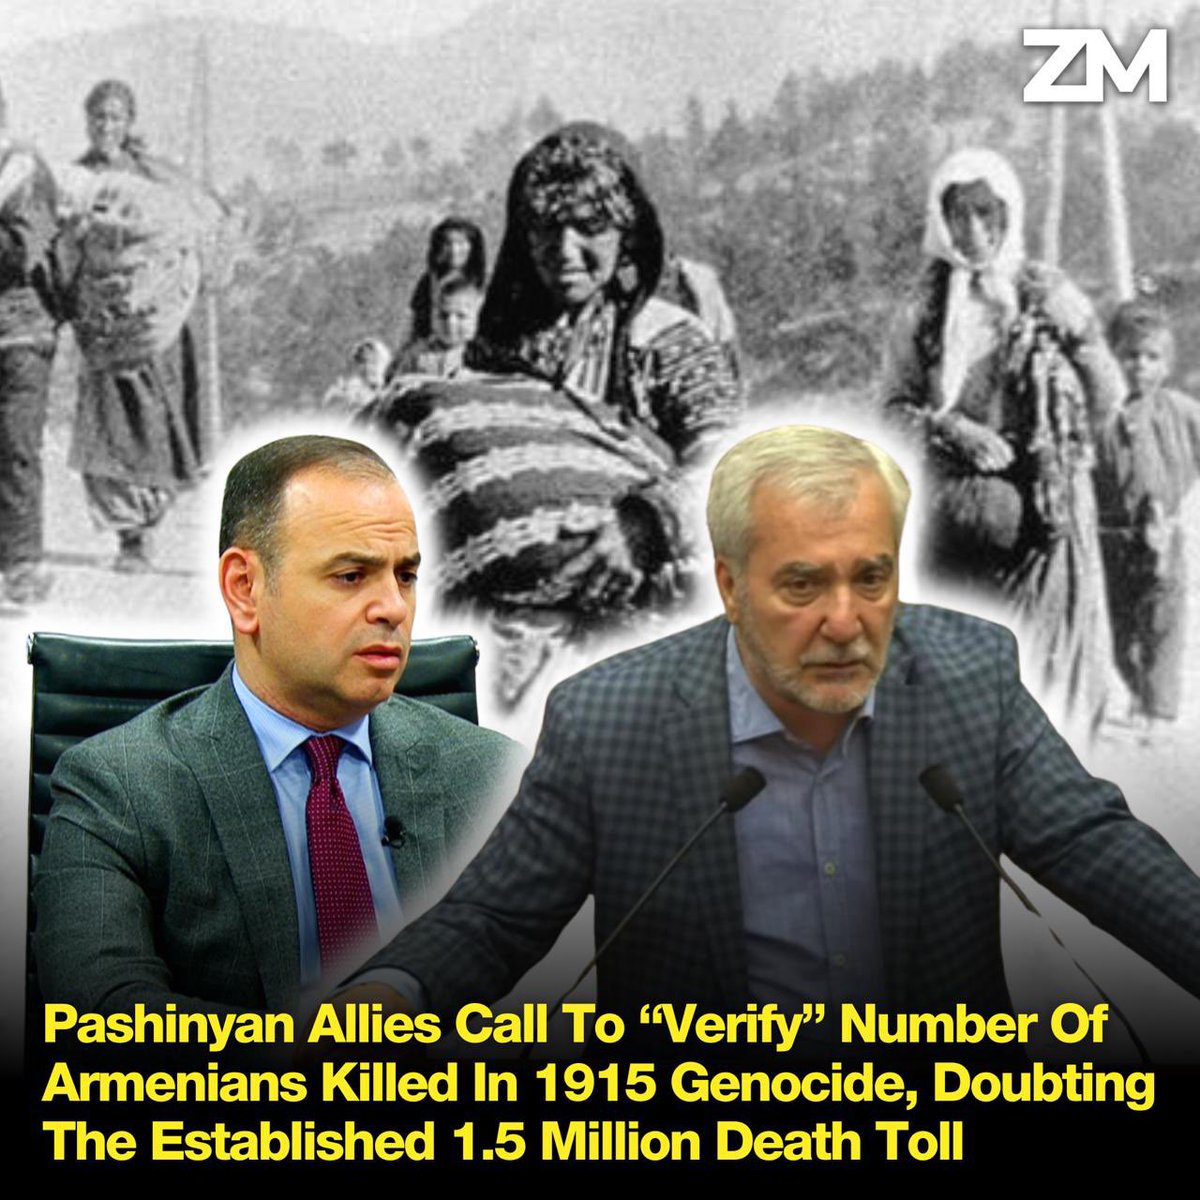 Pashinyan Allies Call To “Verify” Number Of Armenians Killed In 1915 Genocide, Doubting The Established 1.5 Million Death Tolling